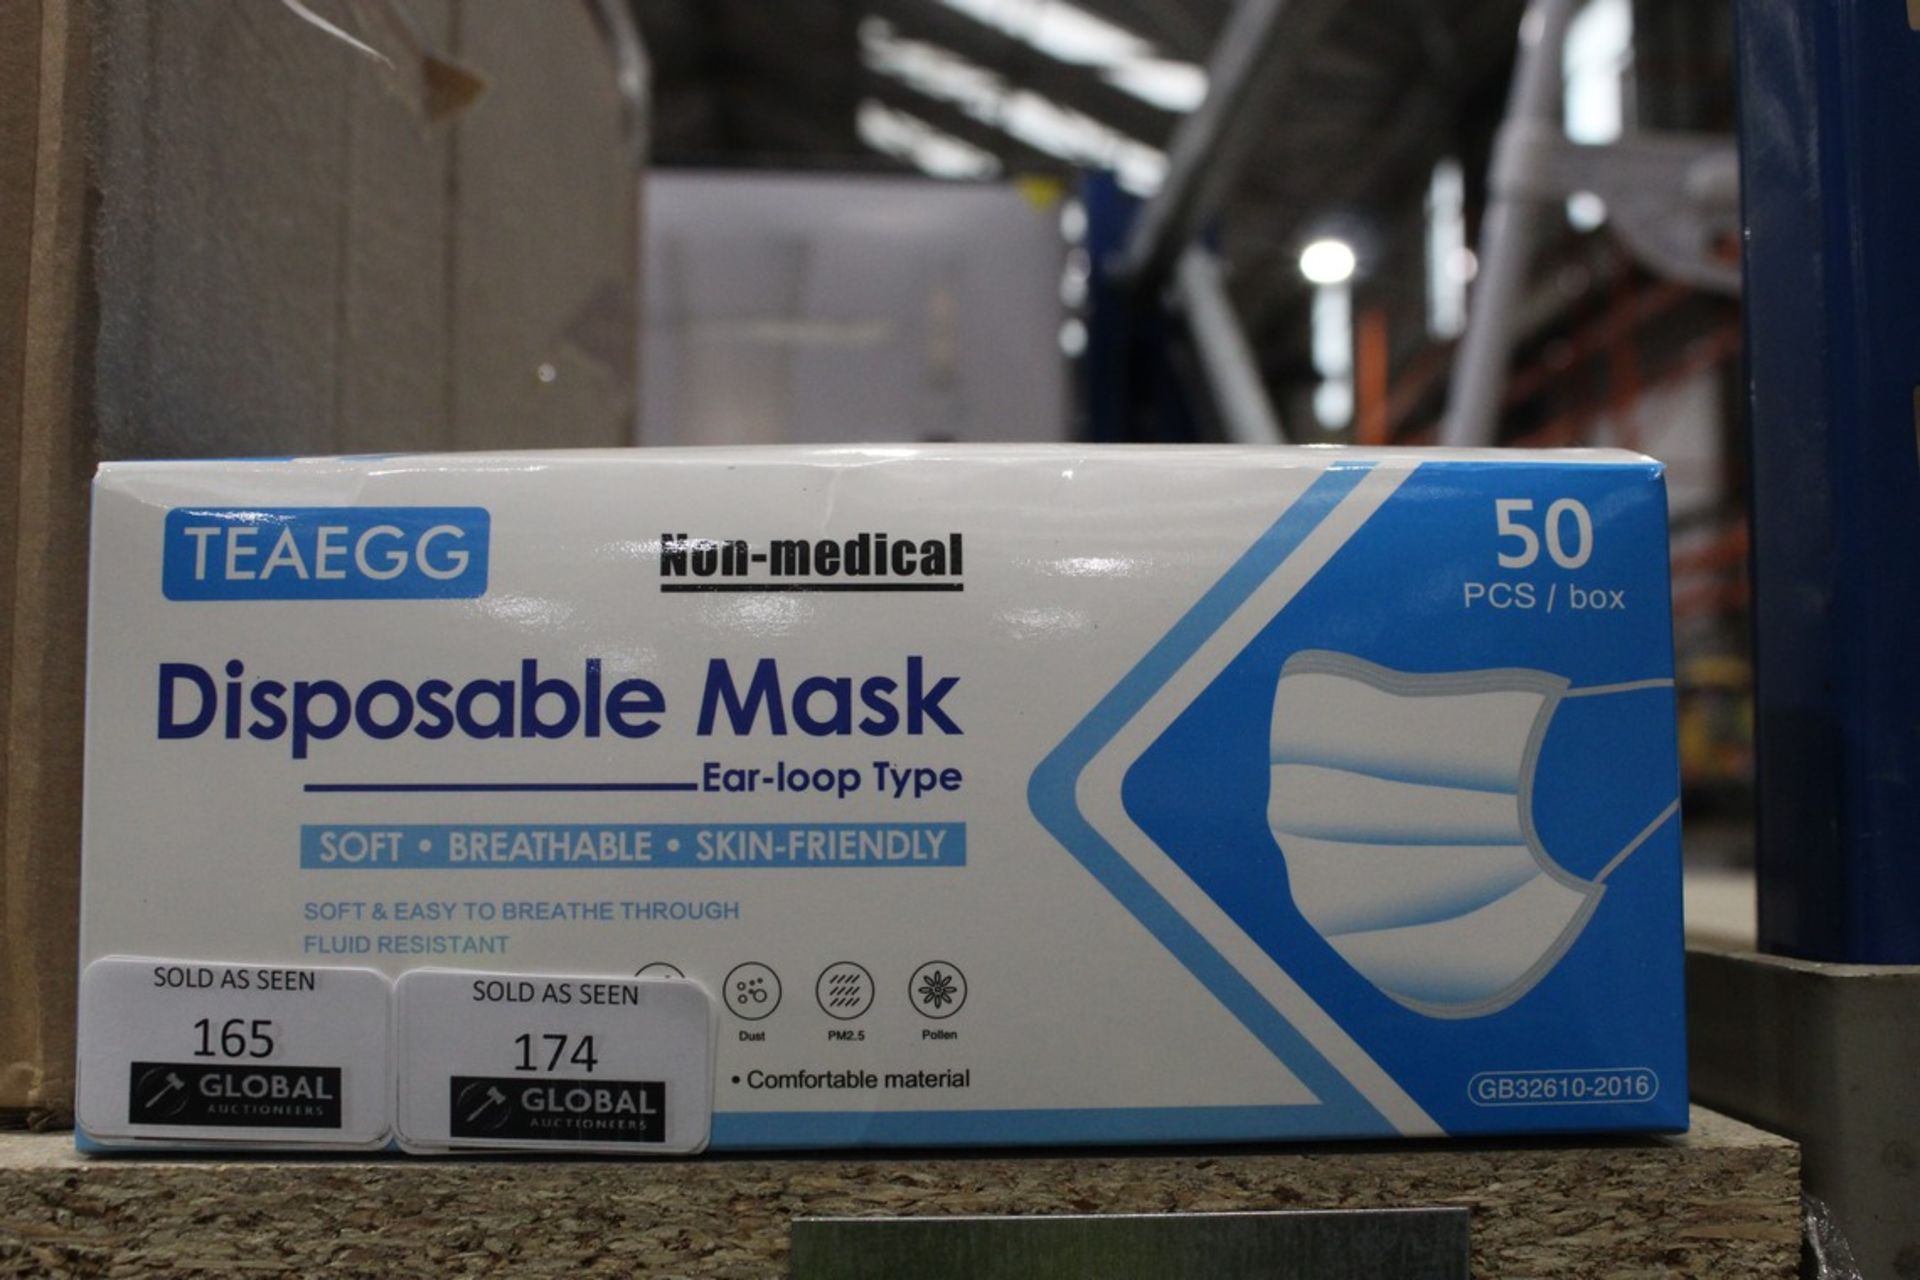 Rrp £300 Boxed To Contain 50 , 3 Ply Medical Disposable Skin Friendly Face Mask